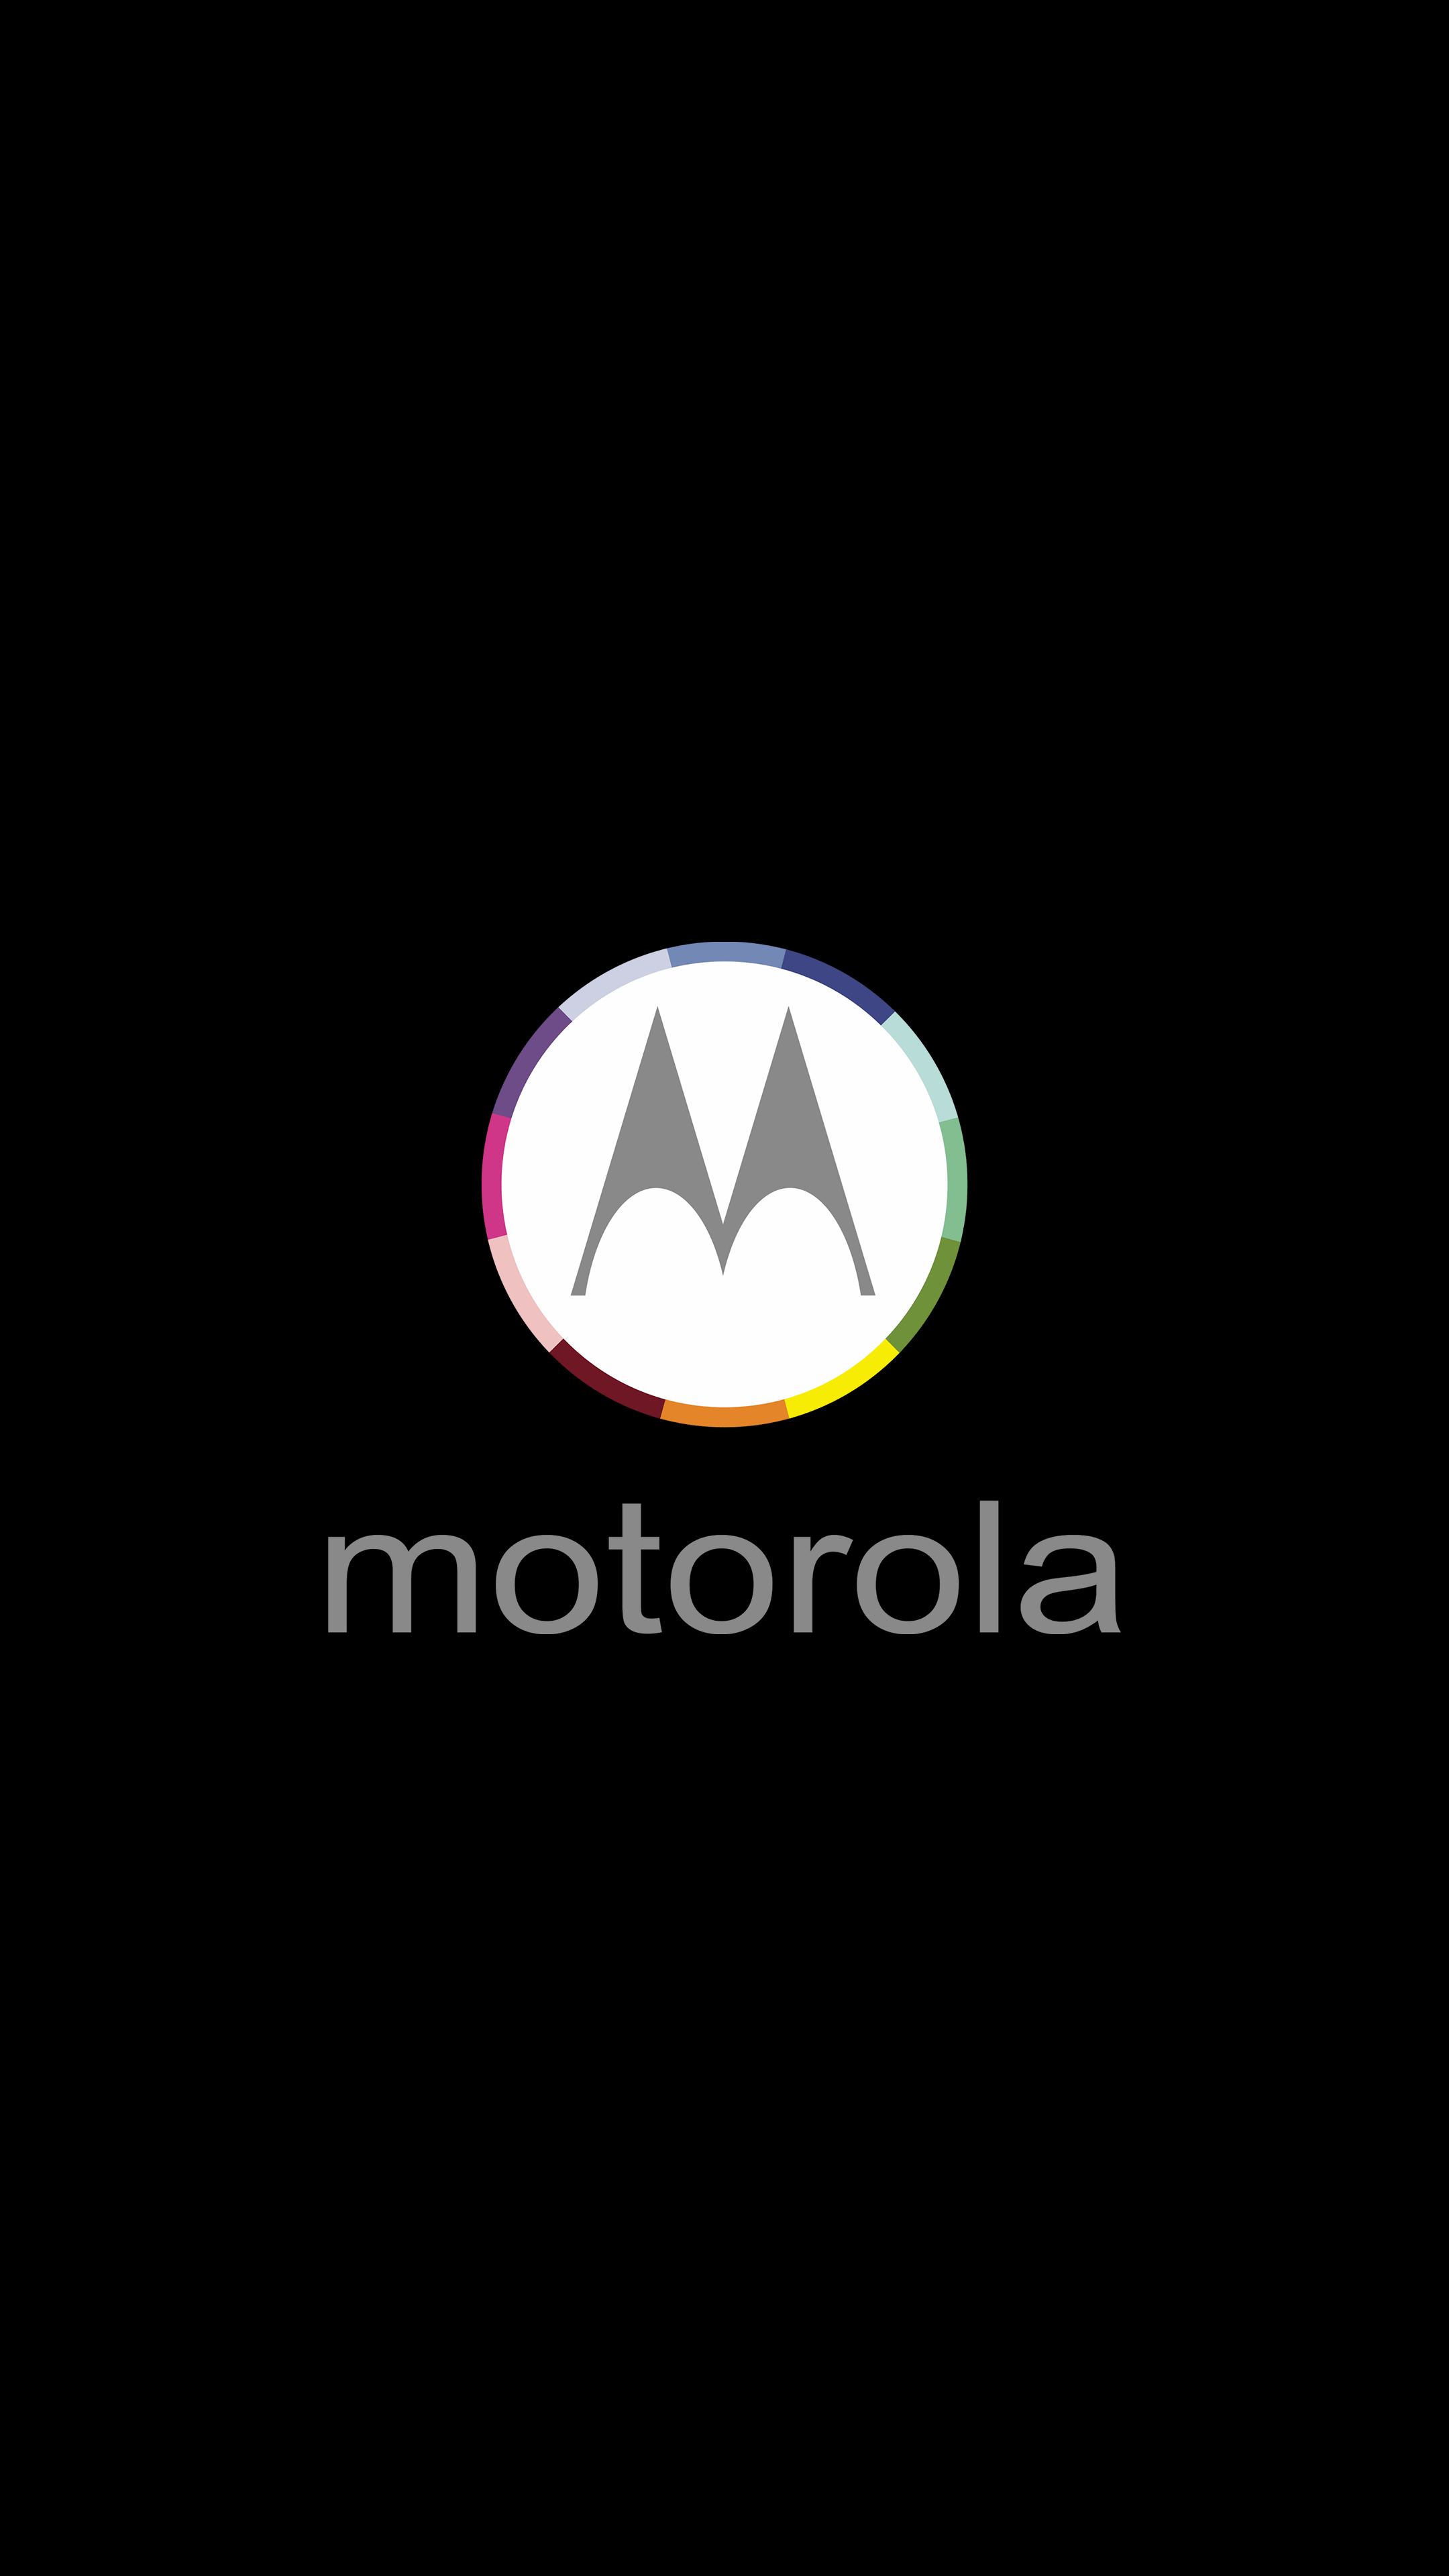 Motorola My UX guide: Everything you need to know - Android Authority